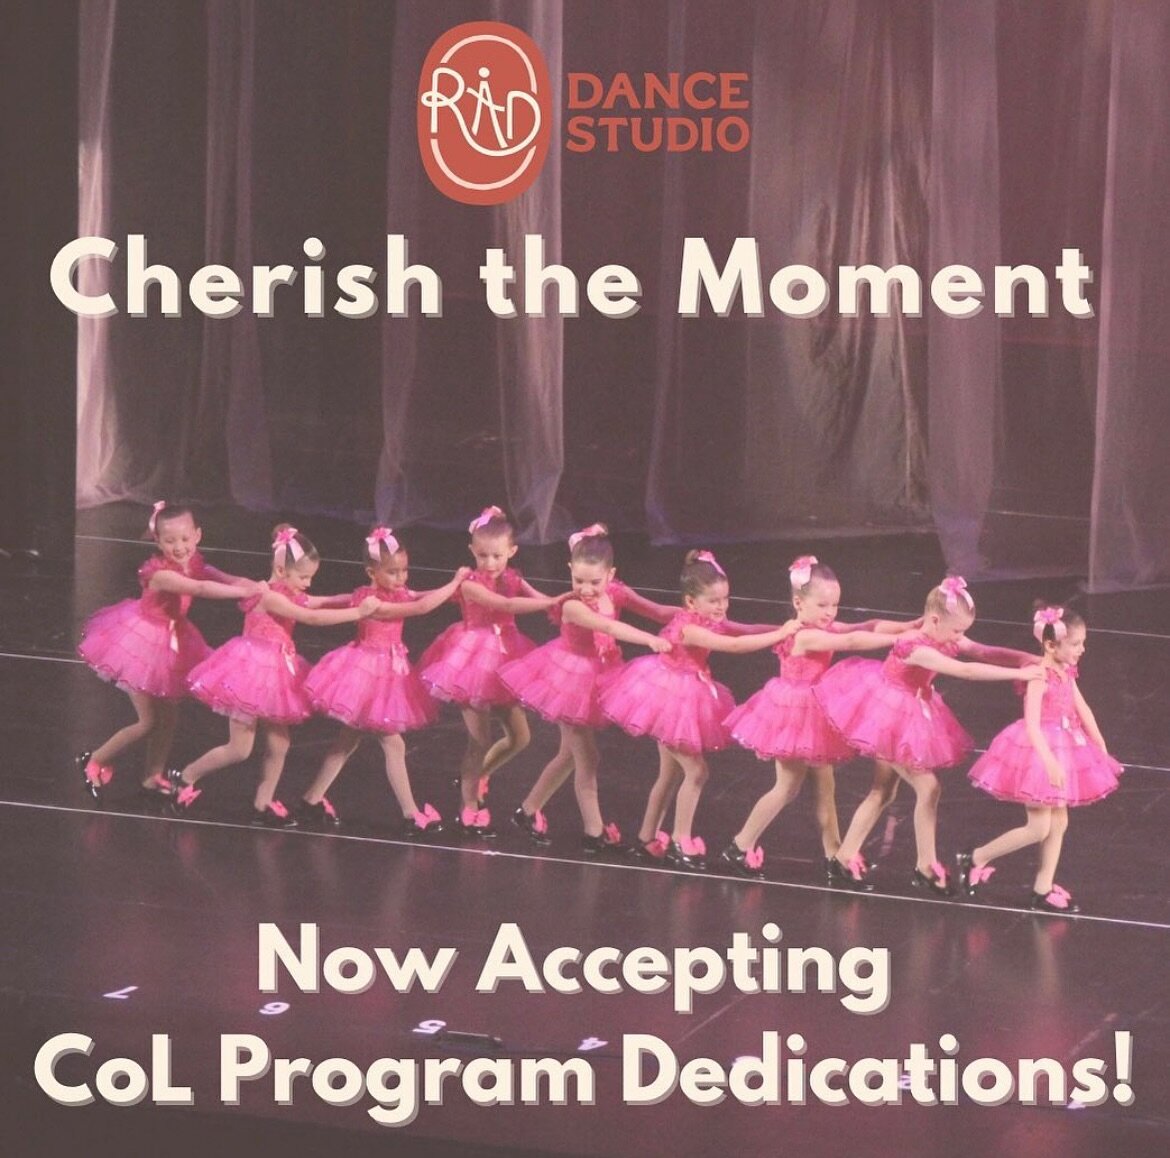 🌟 Every year RAD offers our dance families a
chance to create a personalized dedication in our one of a kind, beautiful Concert of Love Souvenir Program.

🤩 Program dedication space is limited - dedications are accepted on a first come, first serve